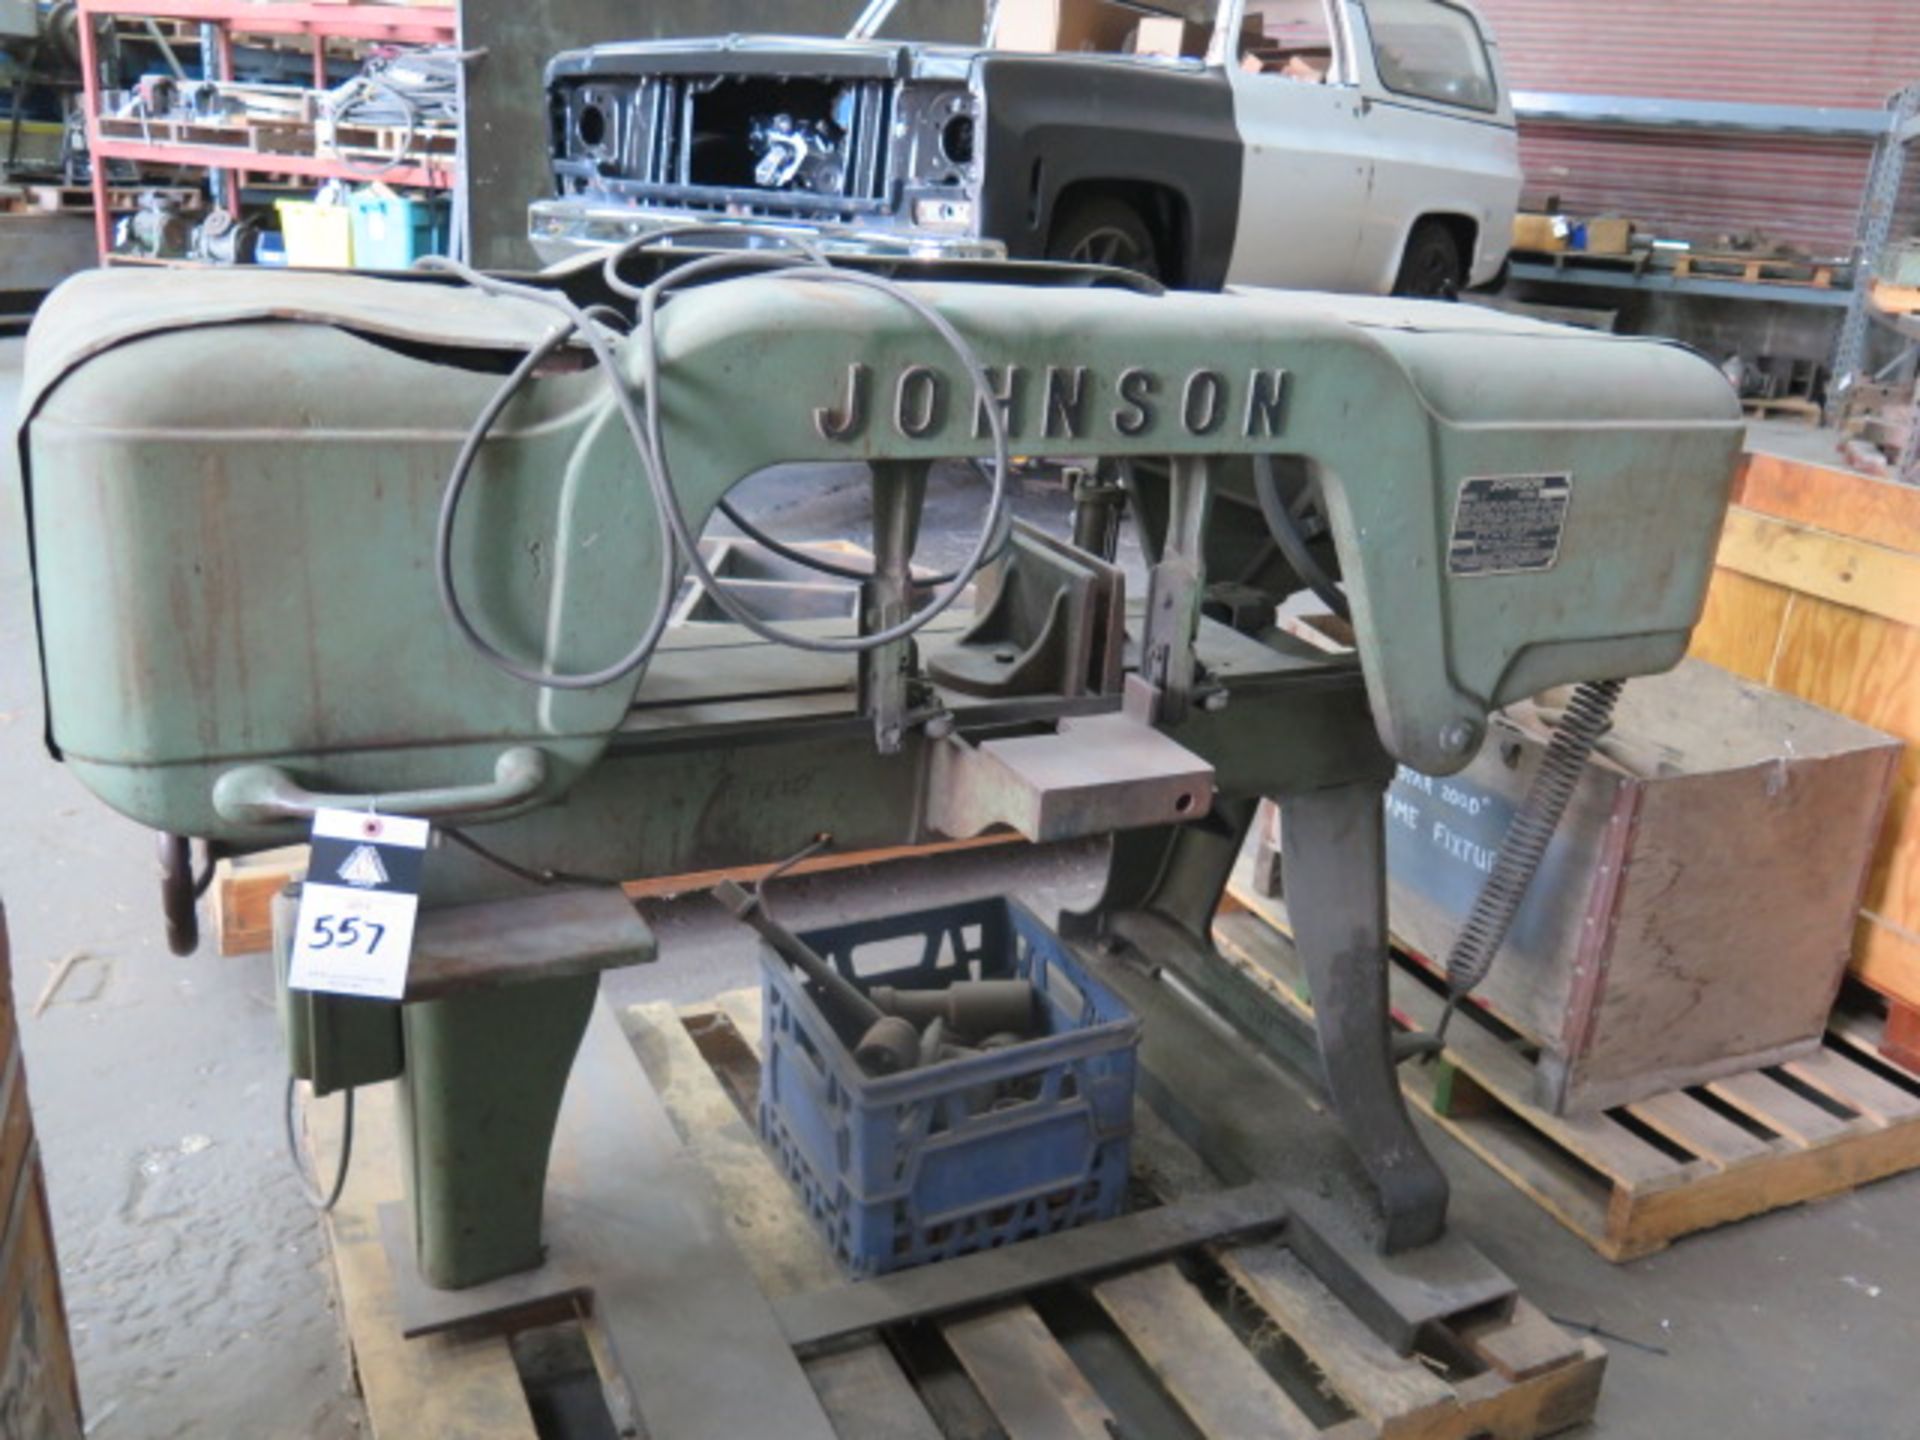 Johnson mdl. J 9" Horizontal Band Saw w/ Manual Clamping (SOLD AS-IS - NO WARRANTY) - Image 2 of 5